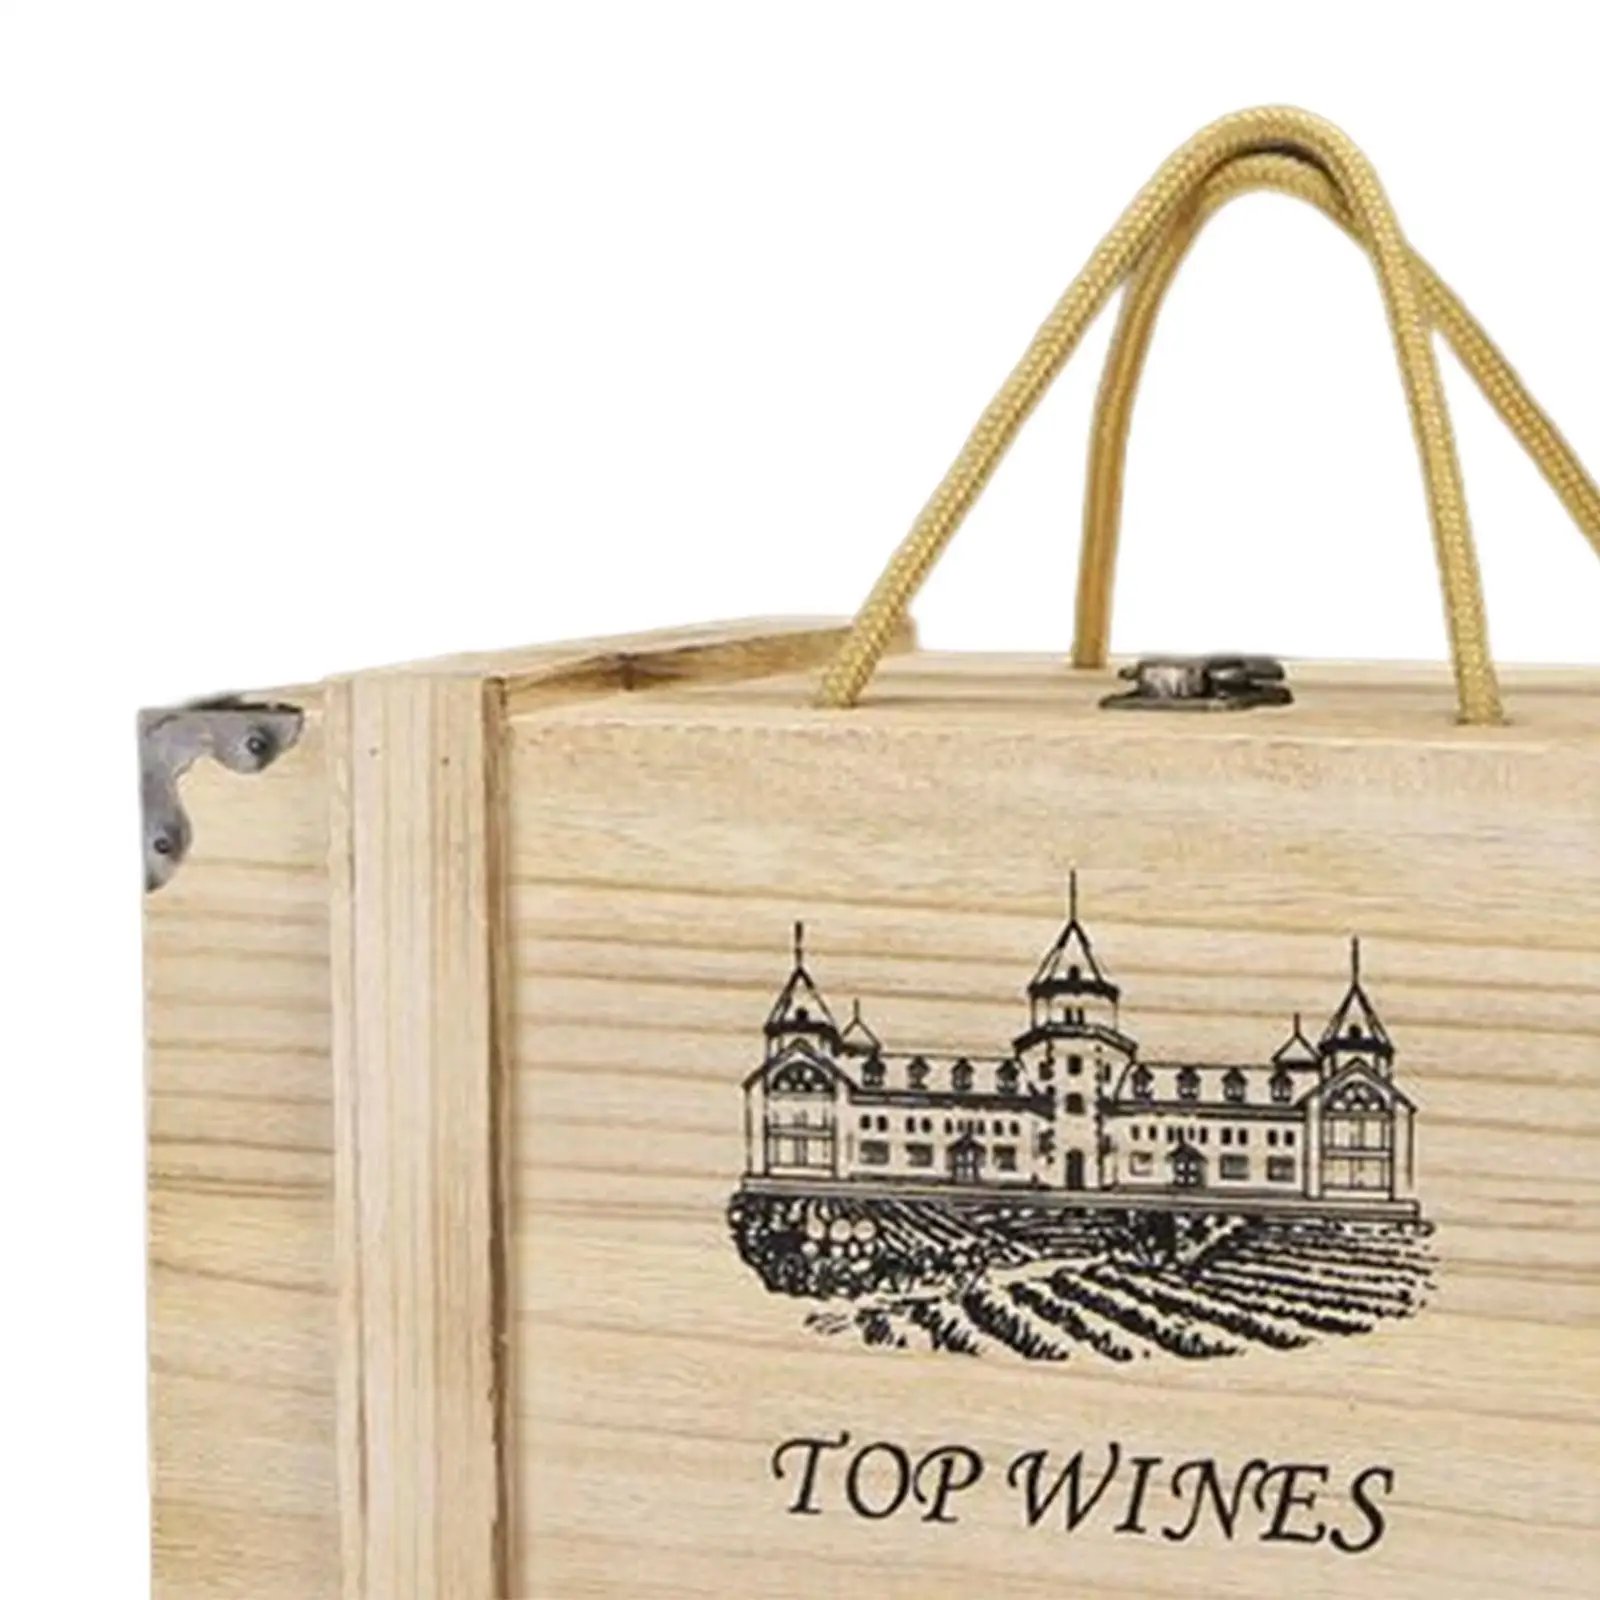 Wooden Wine Box with Handle and Hinged Lid Retro Metal Buckle Lock Wine Decorative Carrier Six Bottled Wine Gift Boxes Holiday